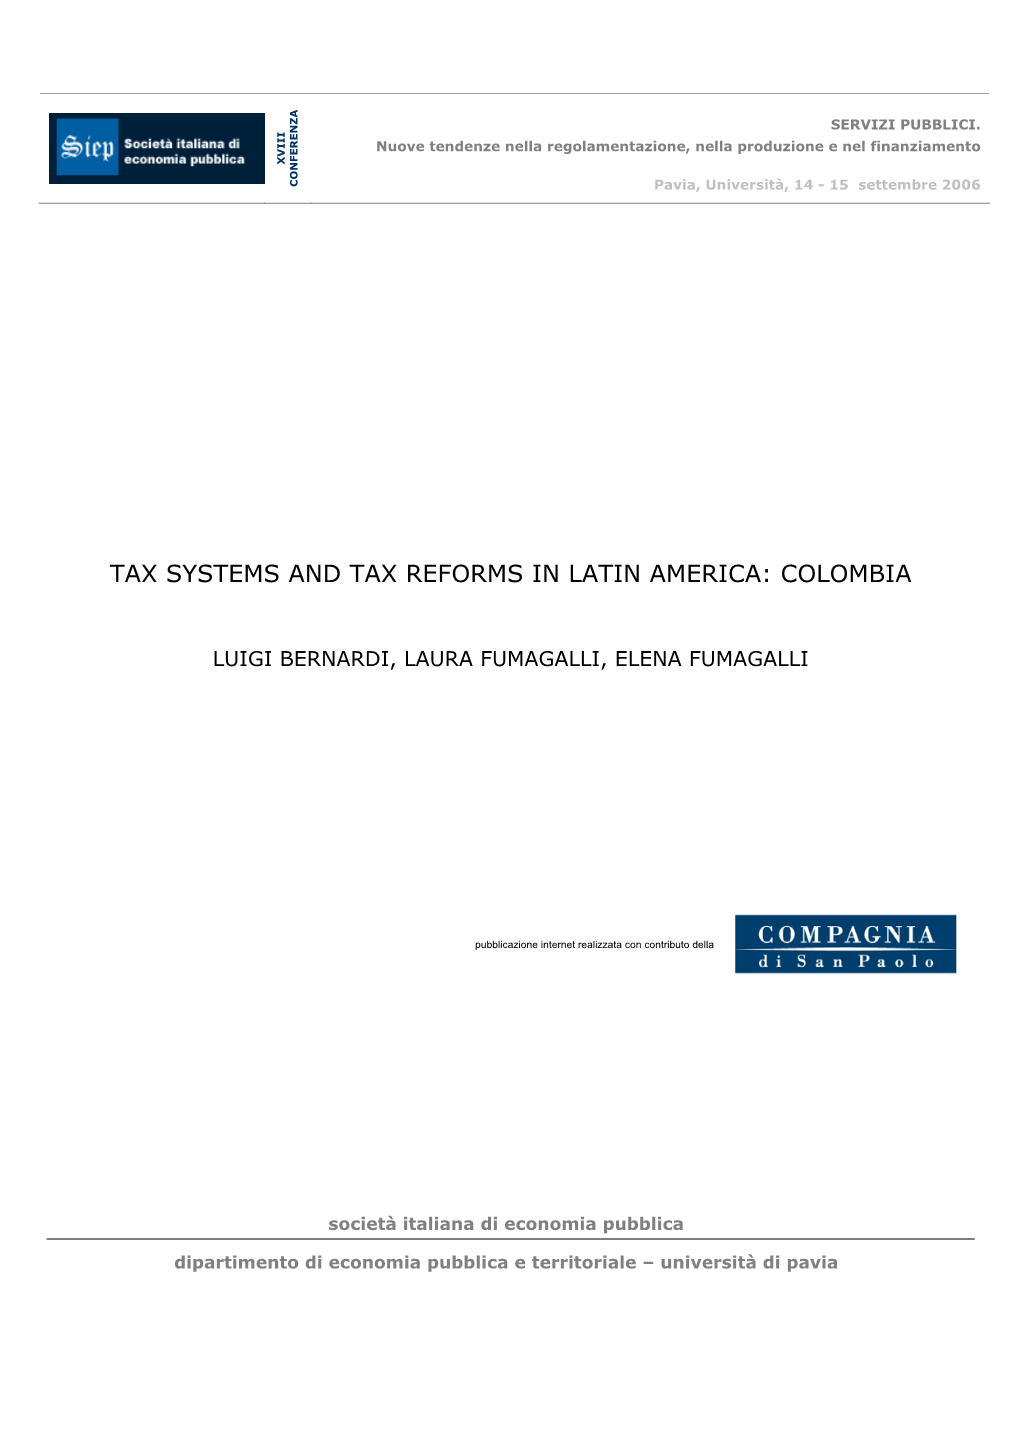 Tax Systems and Tax Reforms in Latin America: Colombia